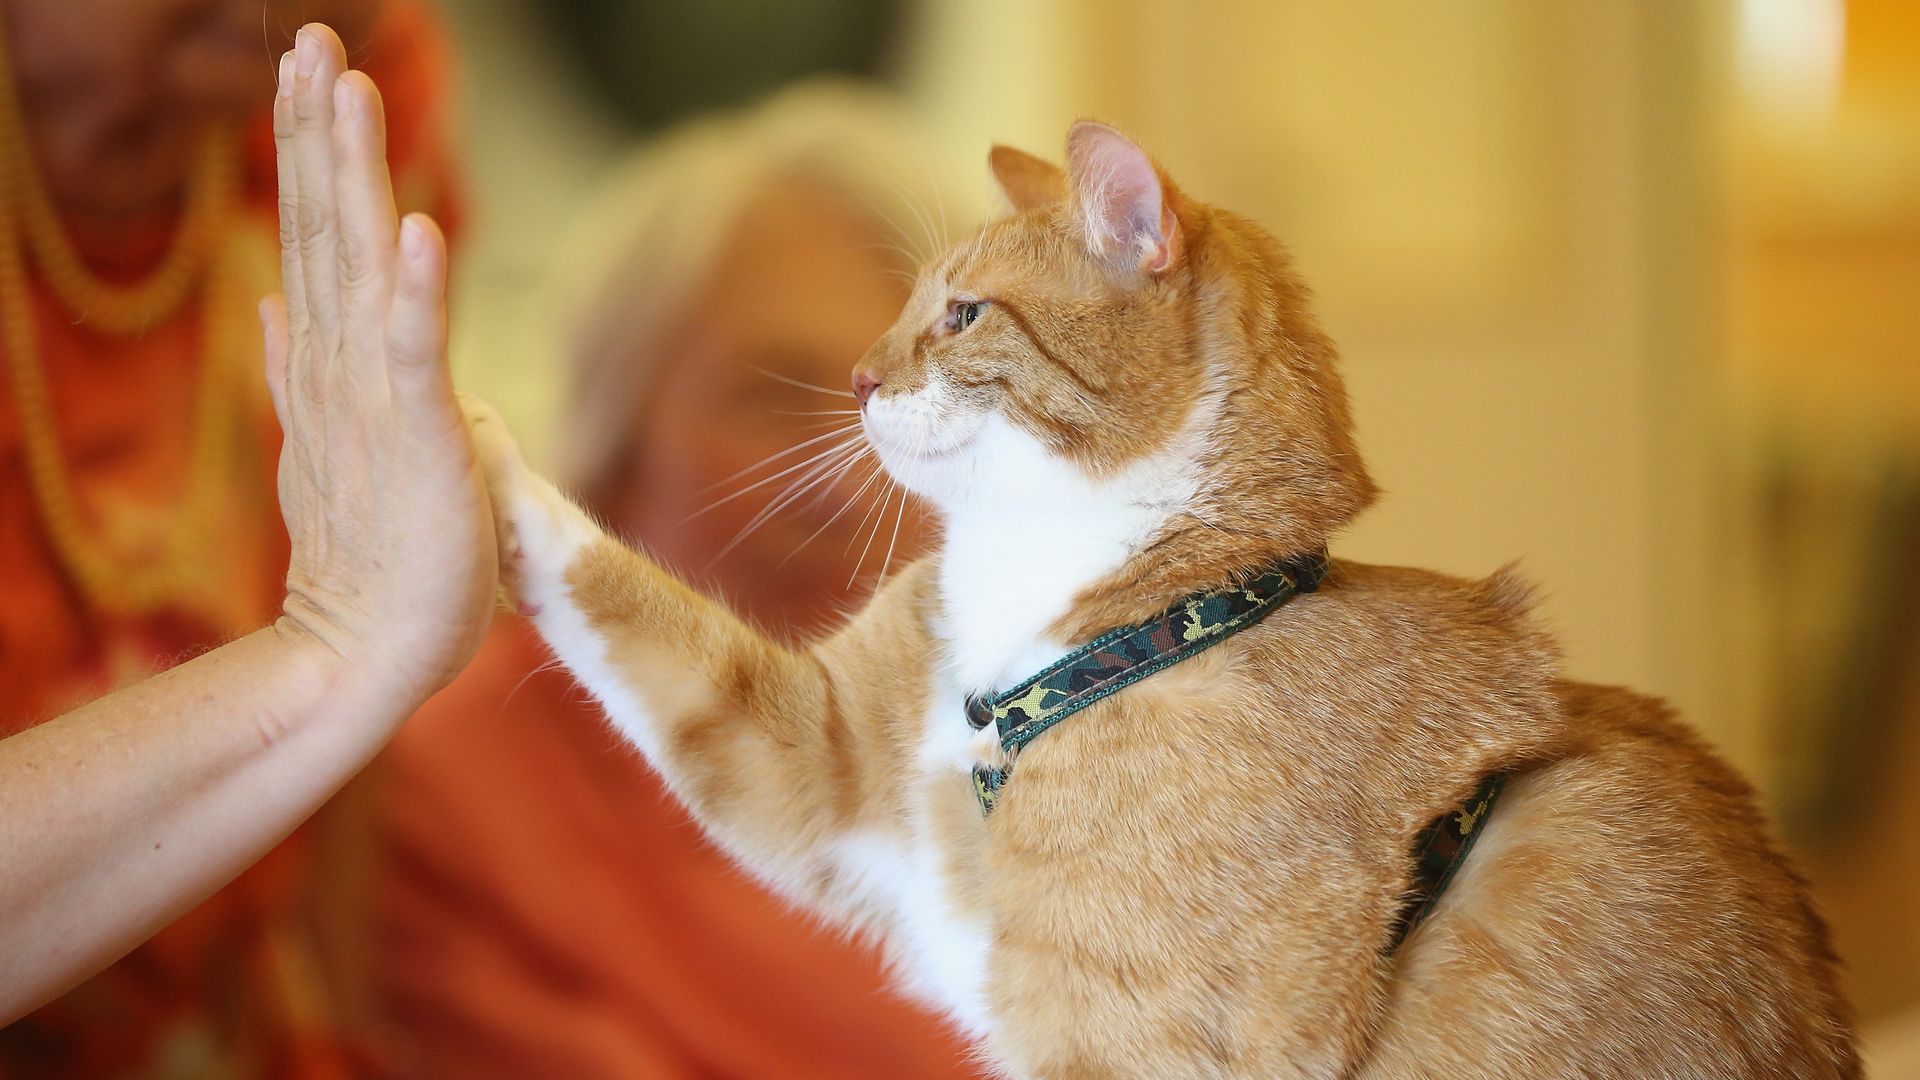  Mogli lifts a paw to touch the palm of his owner Eva Kullmann as facility residents, who both suffer from dementia, look on during the cat's weekly visit at the Lutherstift senior care facility.